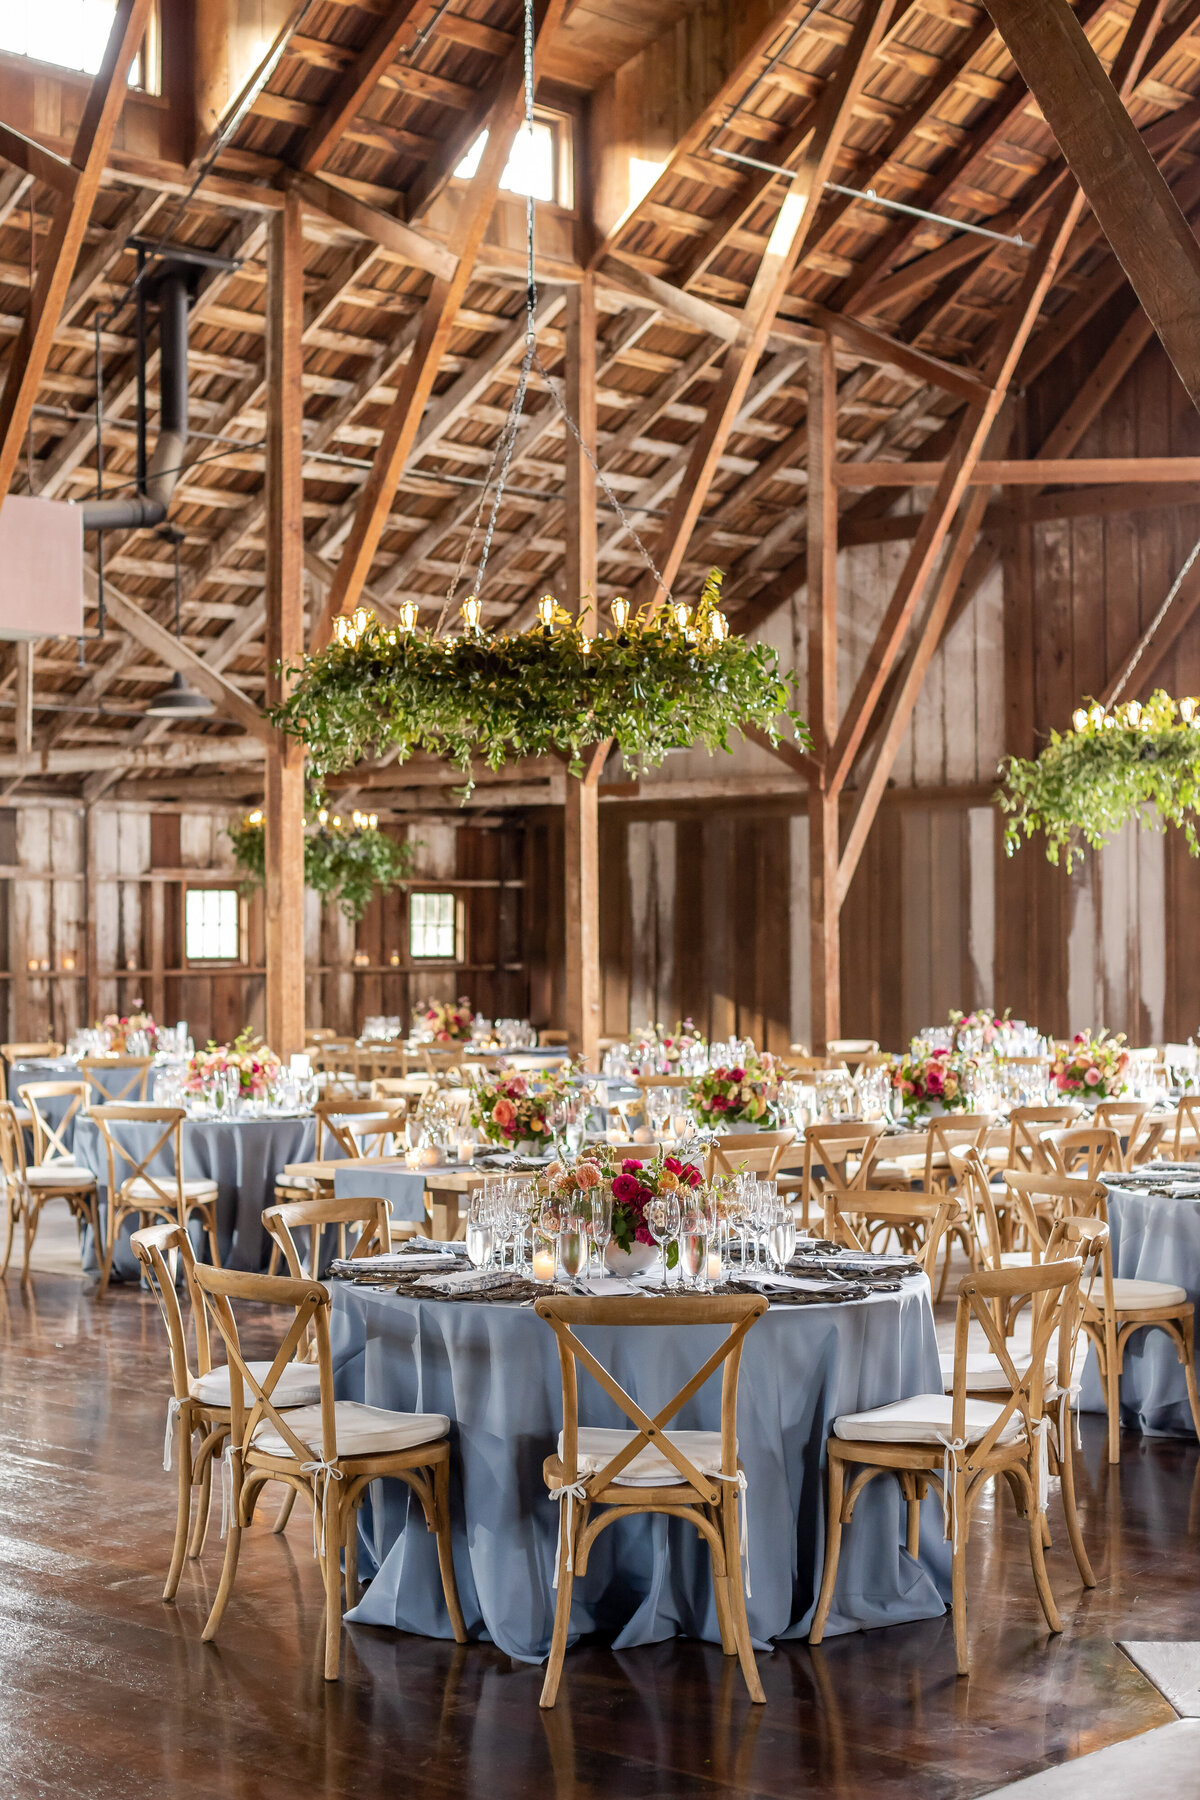 Barn at the Preserve with Blue Tables and Hanging Chandeliers with Greenery